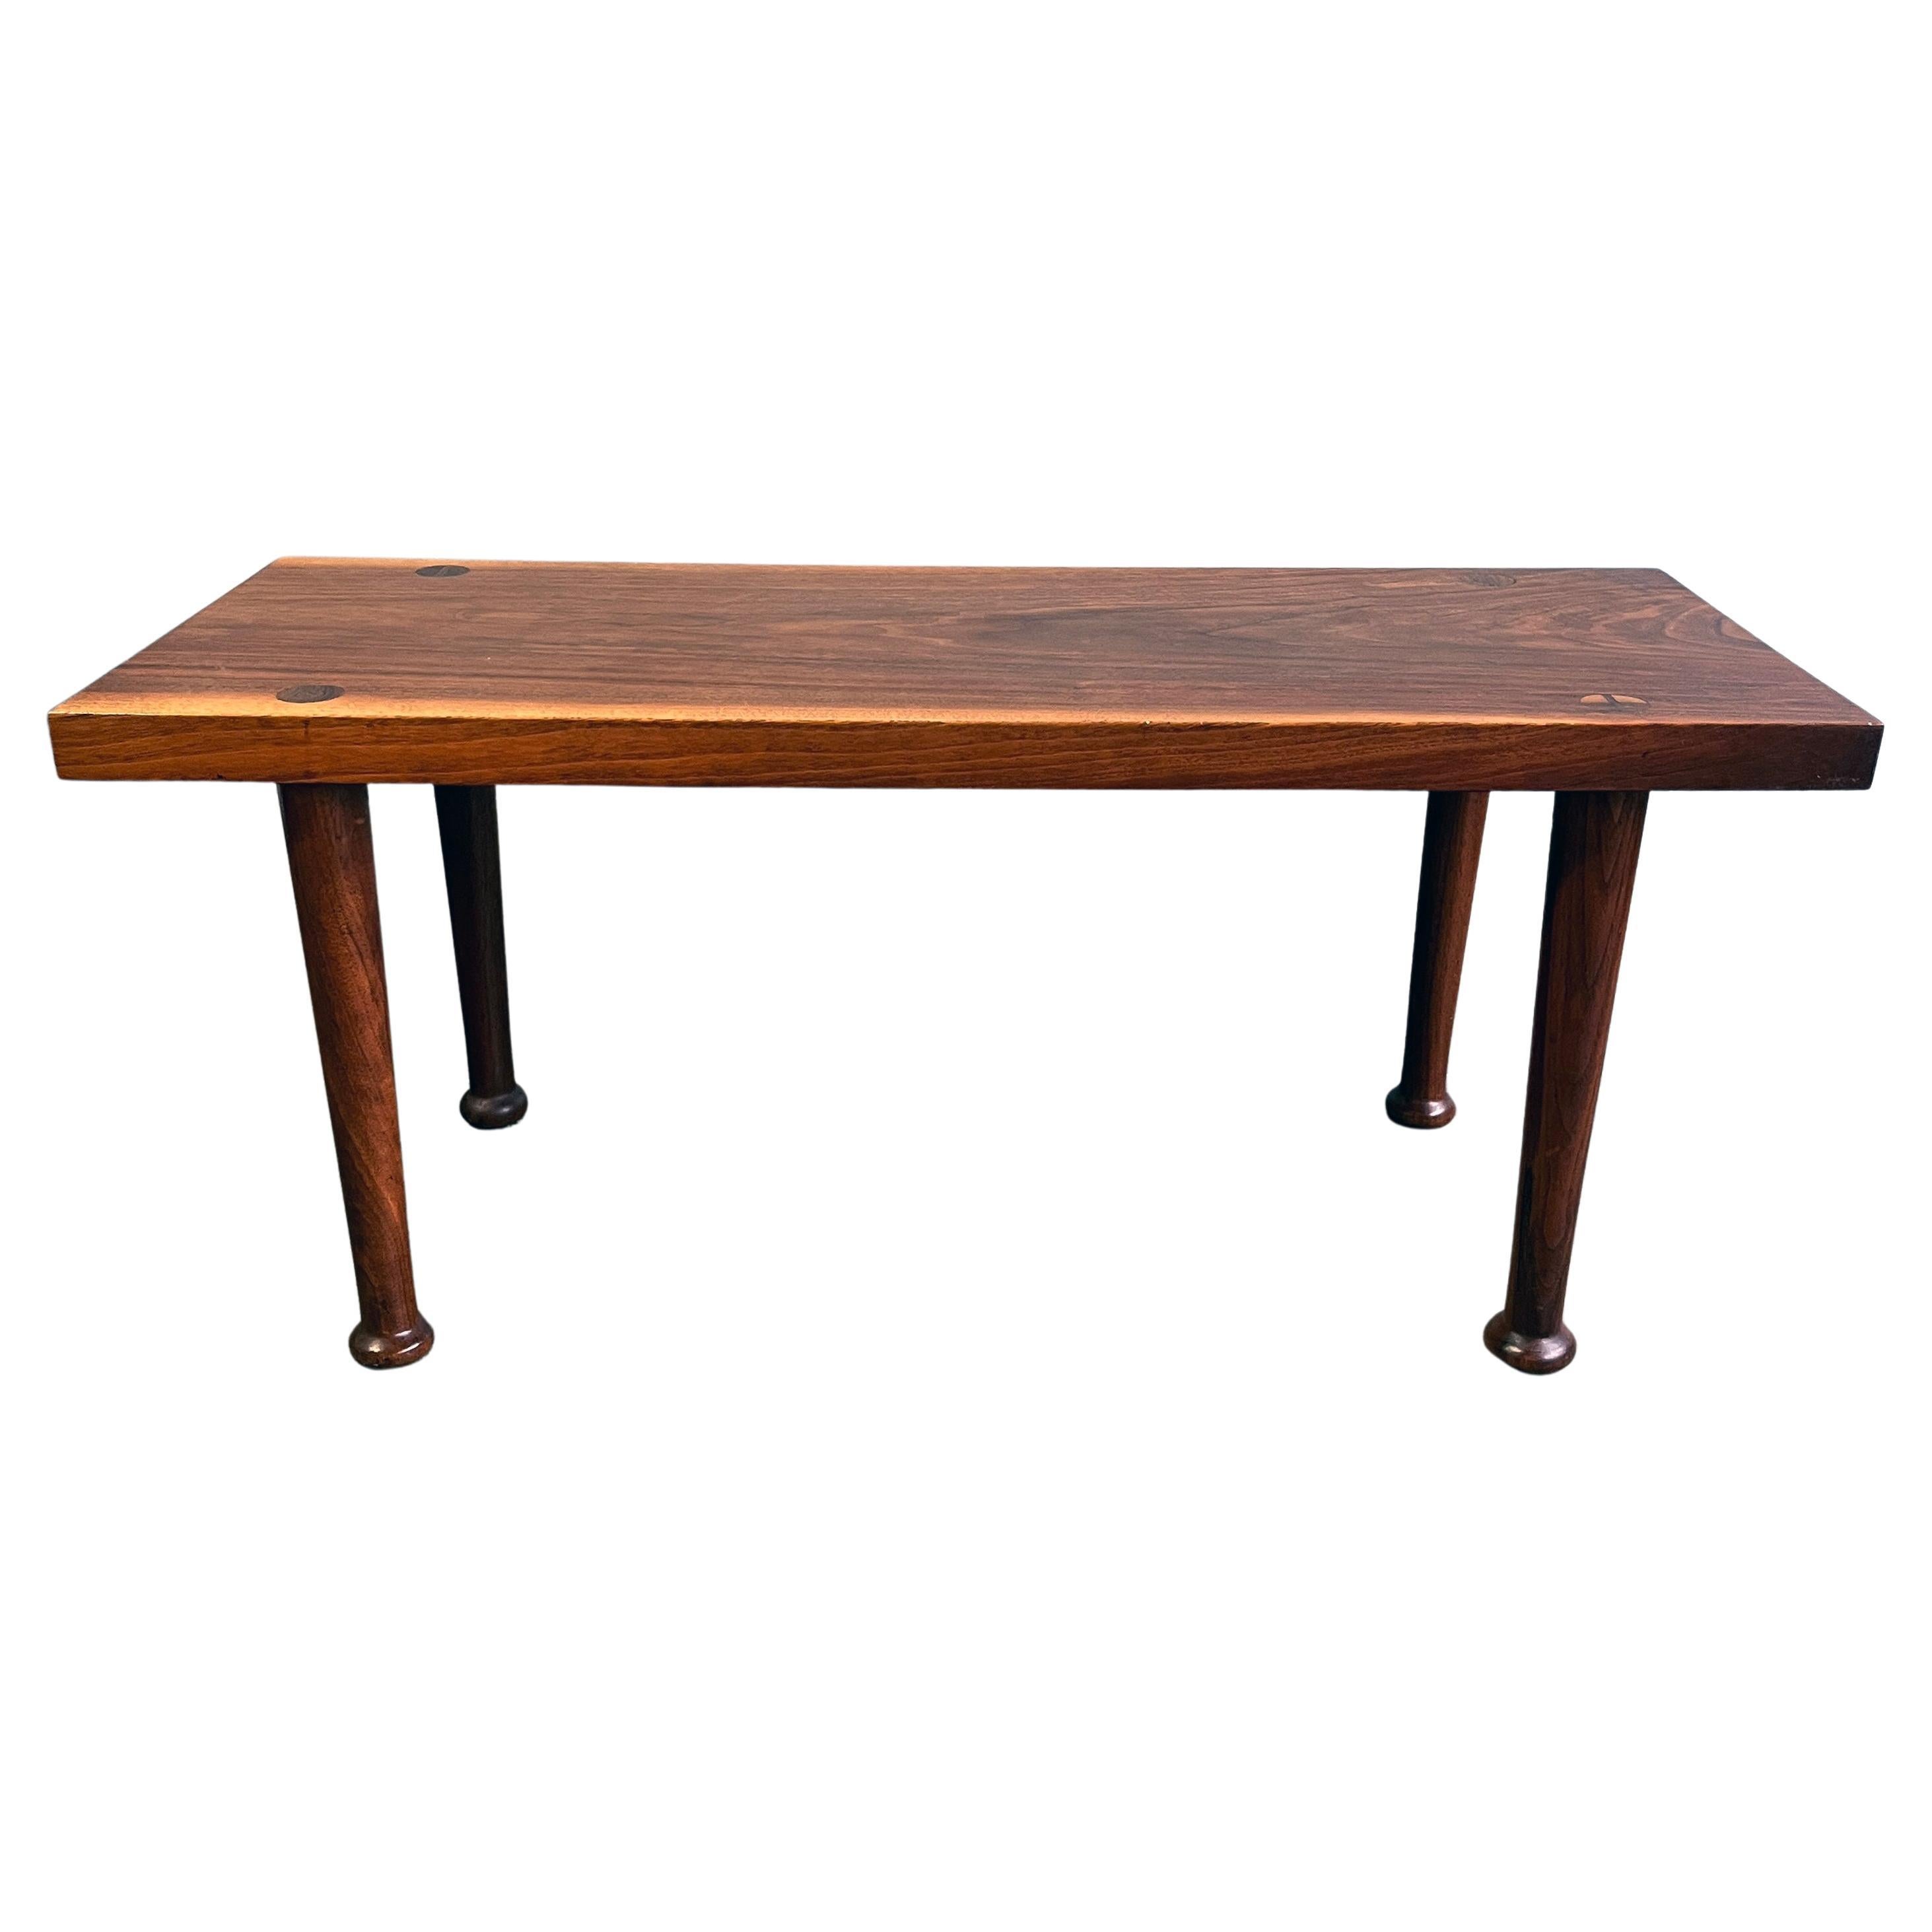 Hardwood American Studio Craft Walnut Bench or Coffee Table Phillip Powell For Sale